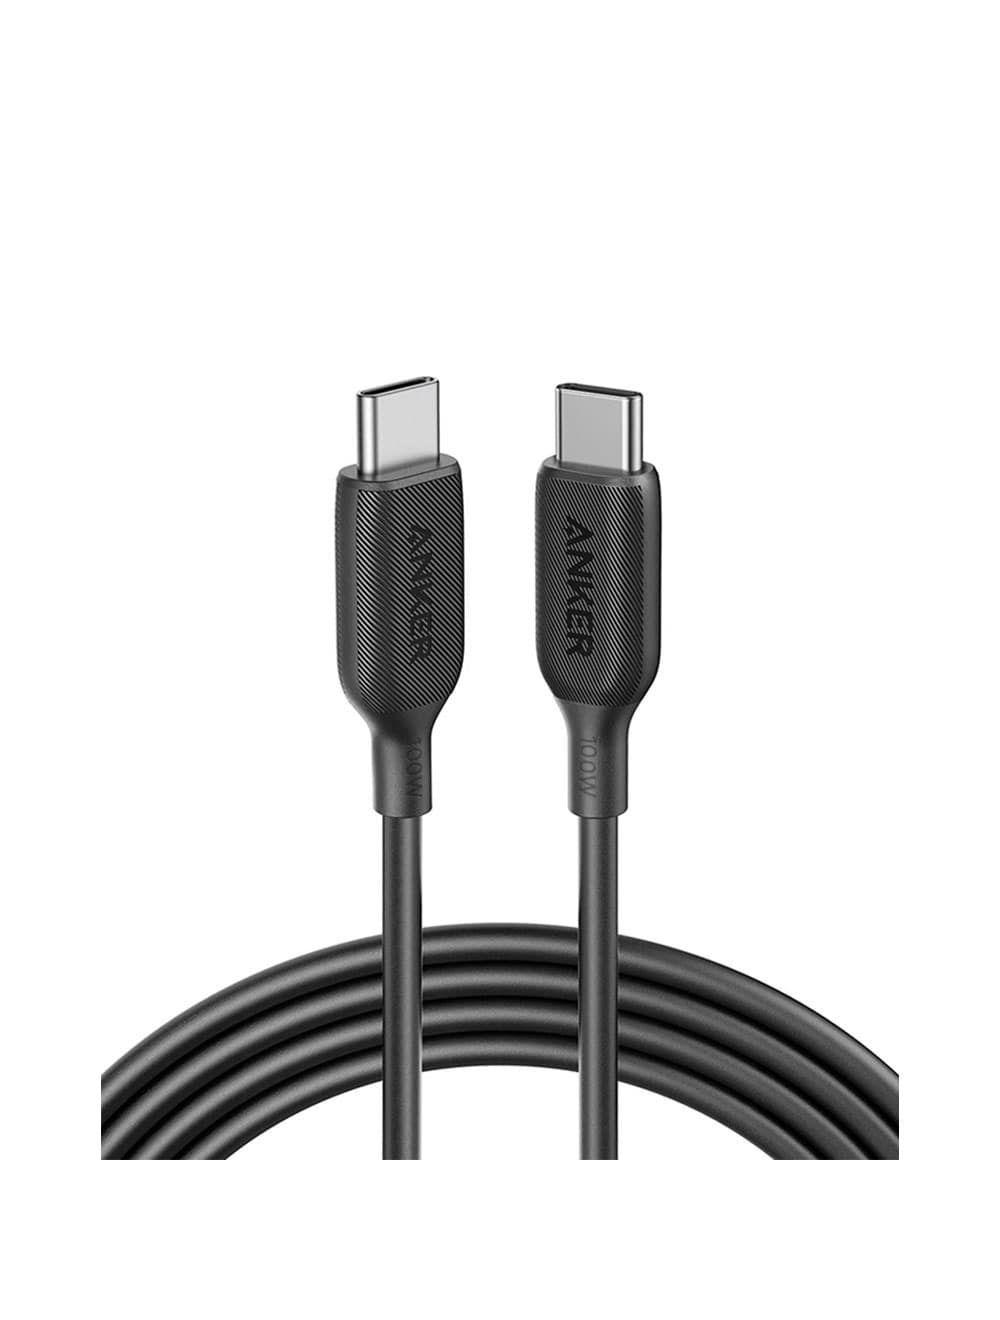 Anker Powerline+ USB-C to USB 3.0 Cable (6ft), High Durability, for USB  Type-C Devices Including The MacBook, ChromeBook Pixel, Nexus 5X, Nexus 6P